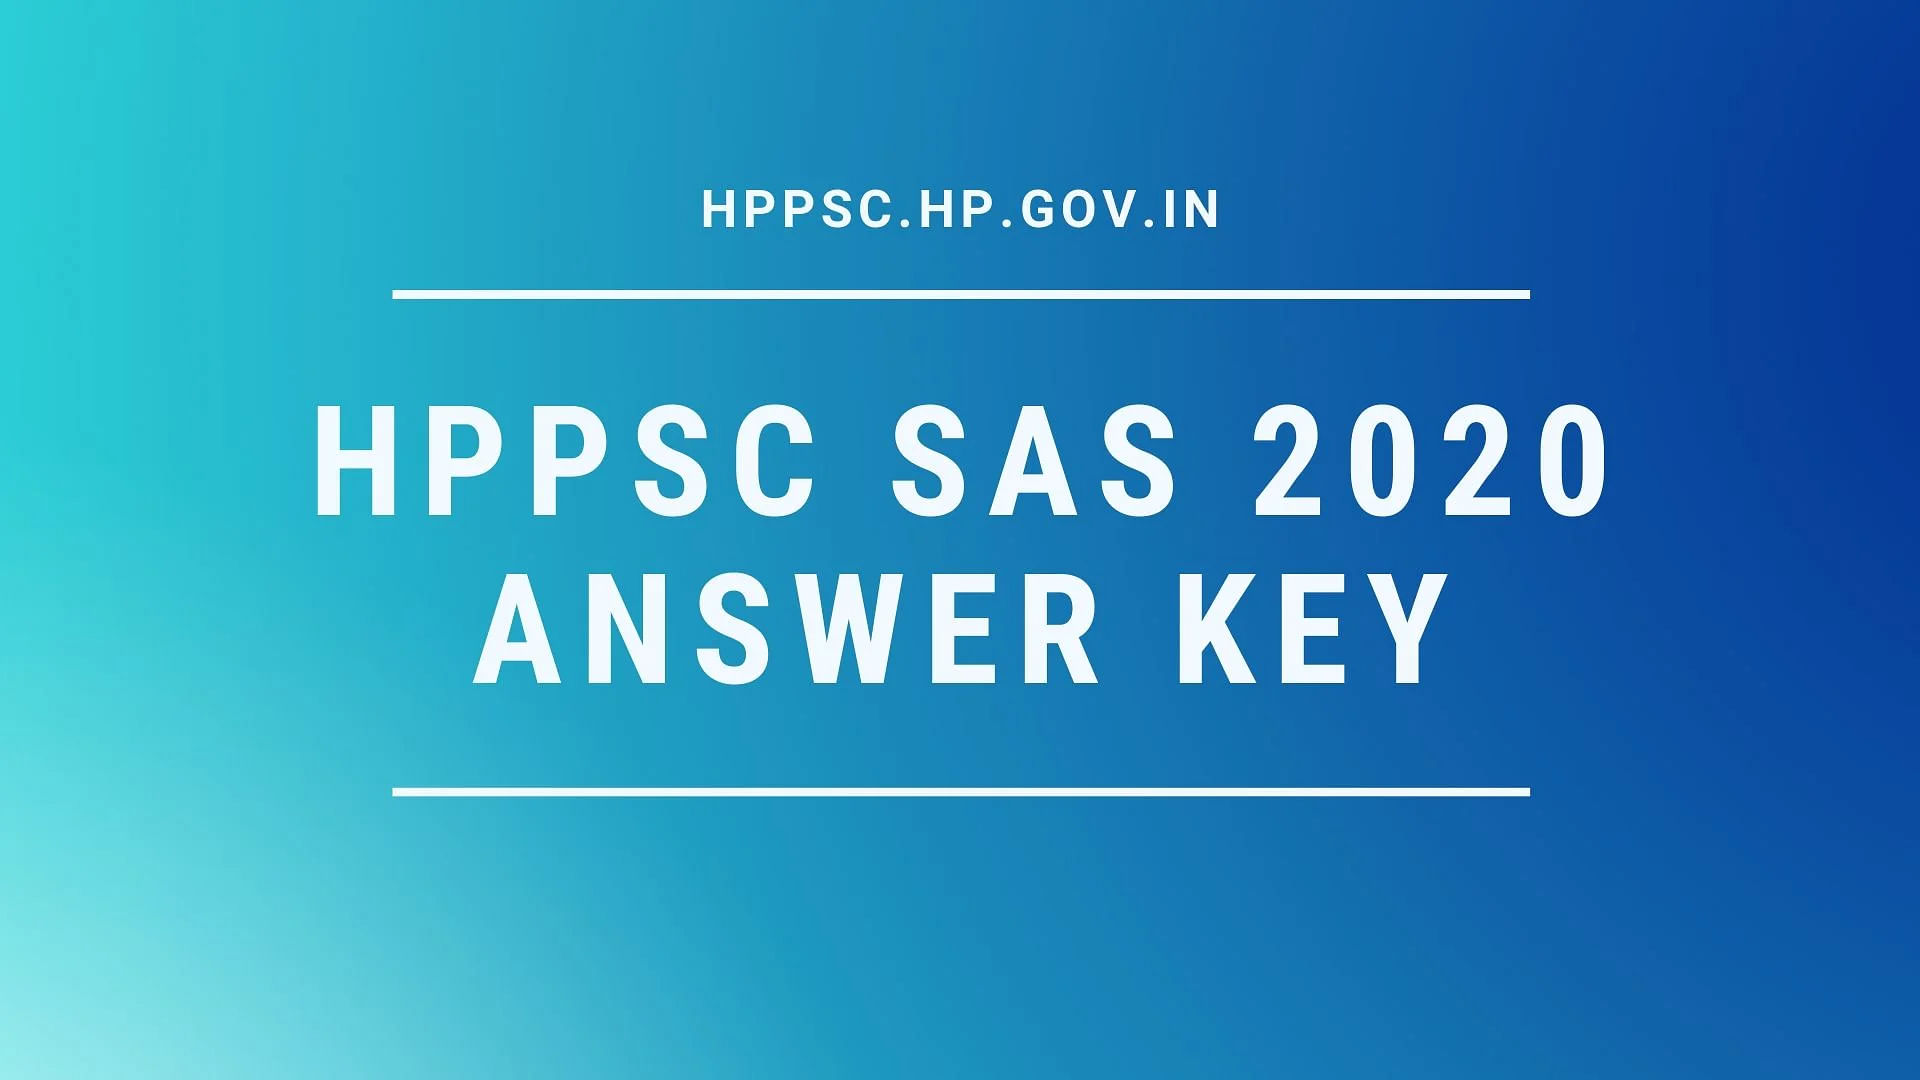 HPPSC Subordinate Allied Services 2020 Exam Answer Key Released